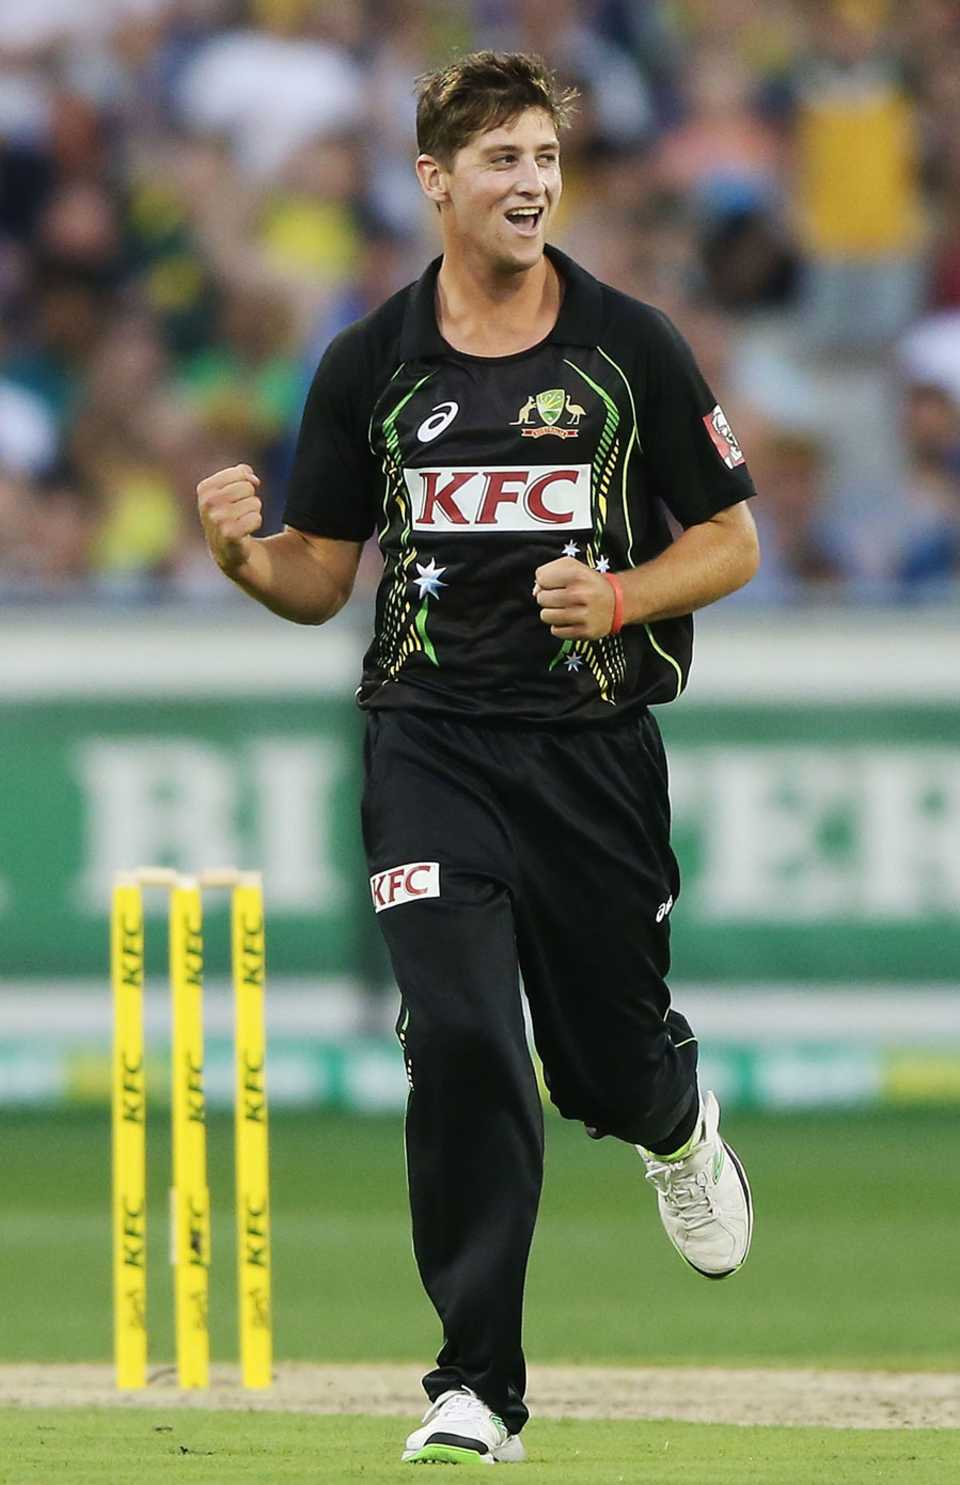 James Muirhead impressed in his second international appearance, Australia v England, 2nd T20, Melbourne, January 31, 2014